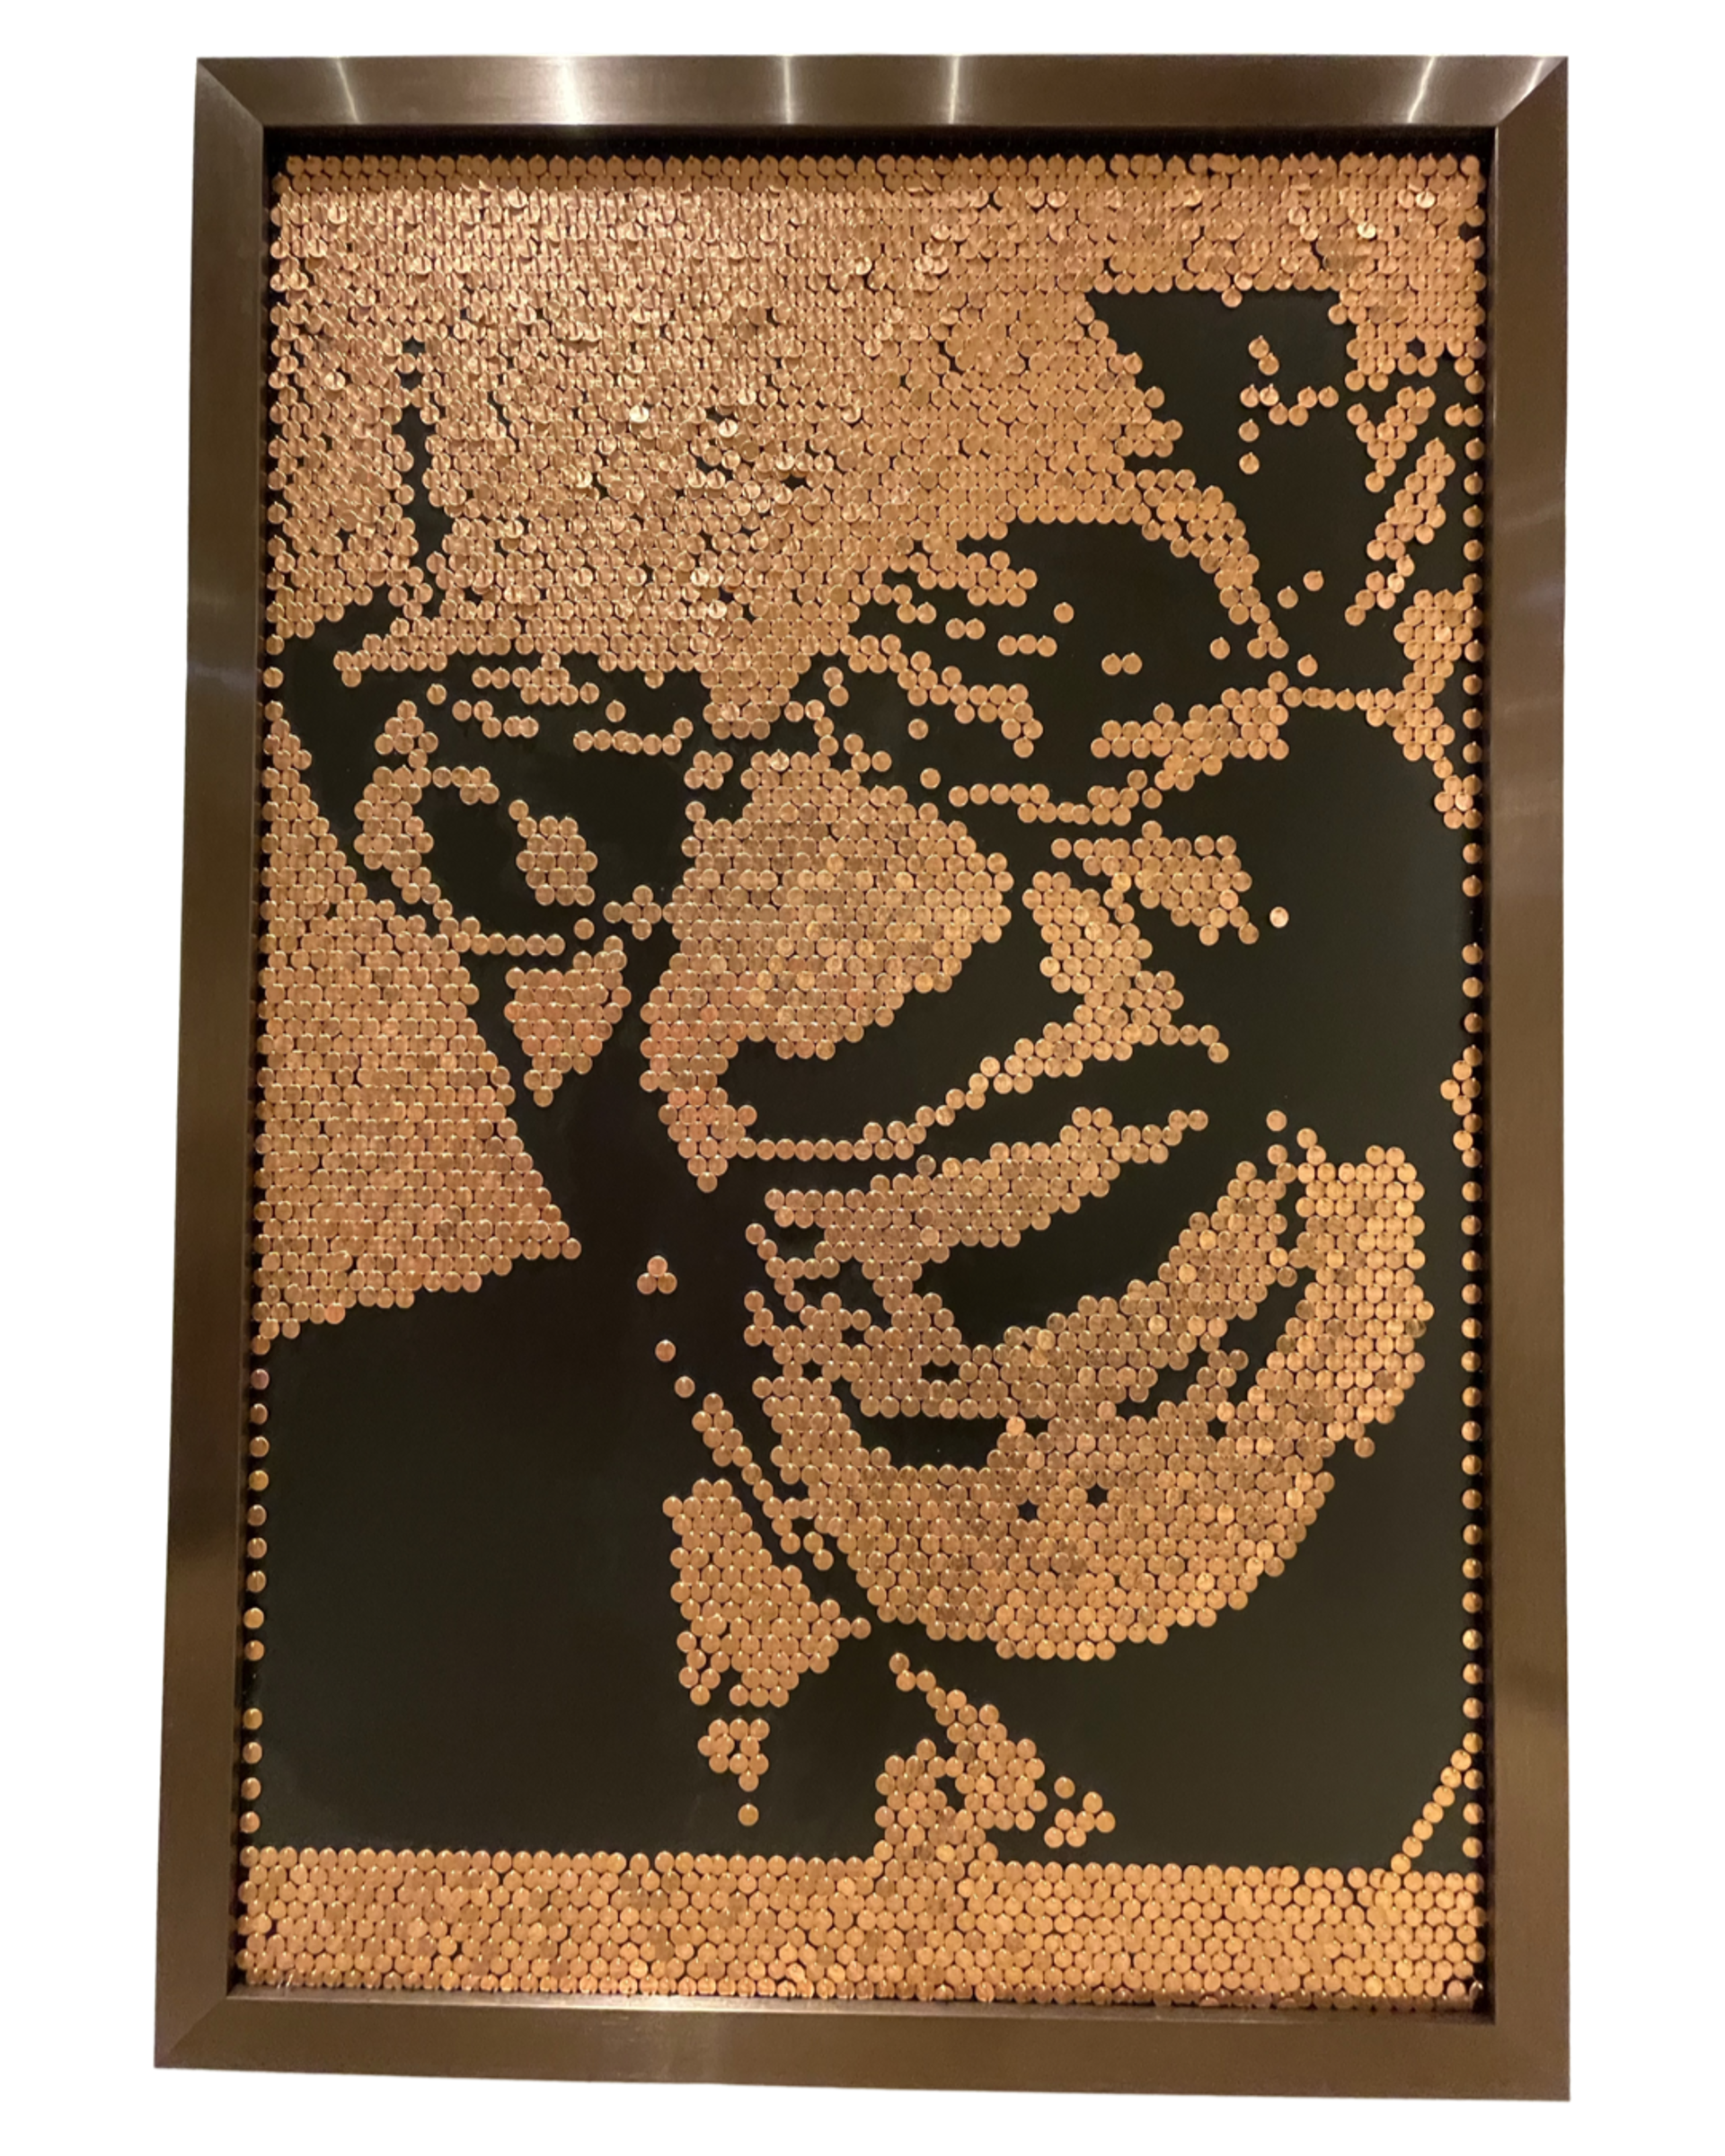 Ray Charles by "Coins & Sequins On Canvas" by Efi Mashiah